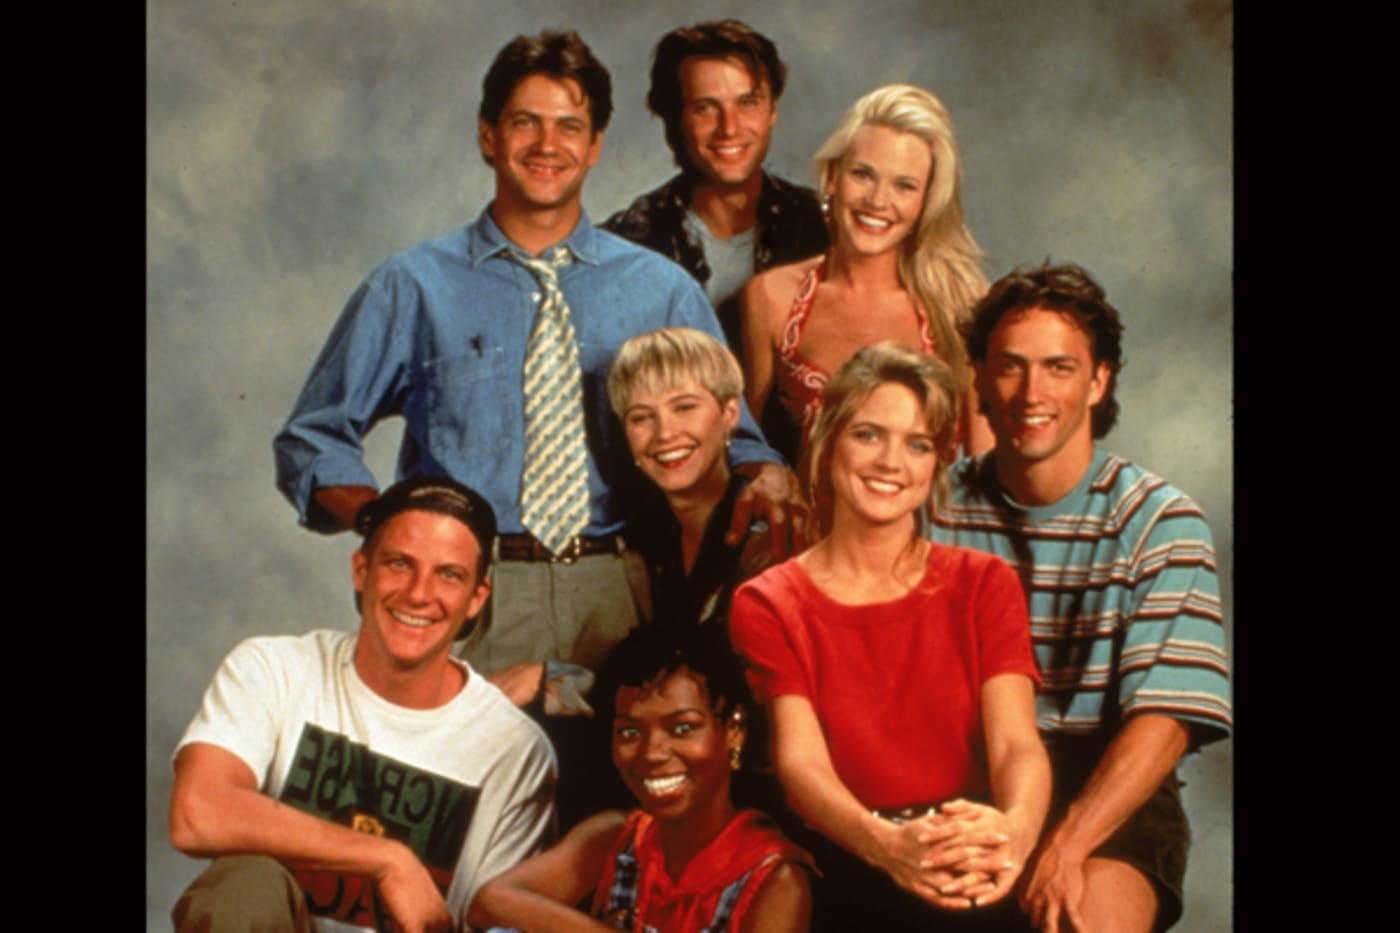 Of the 90s sitcoms 20 '90s